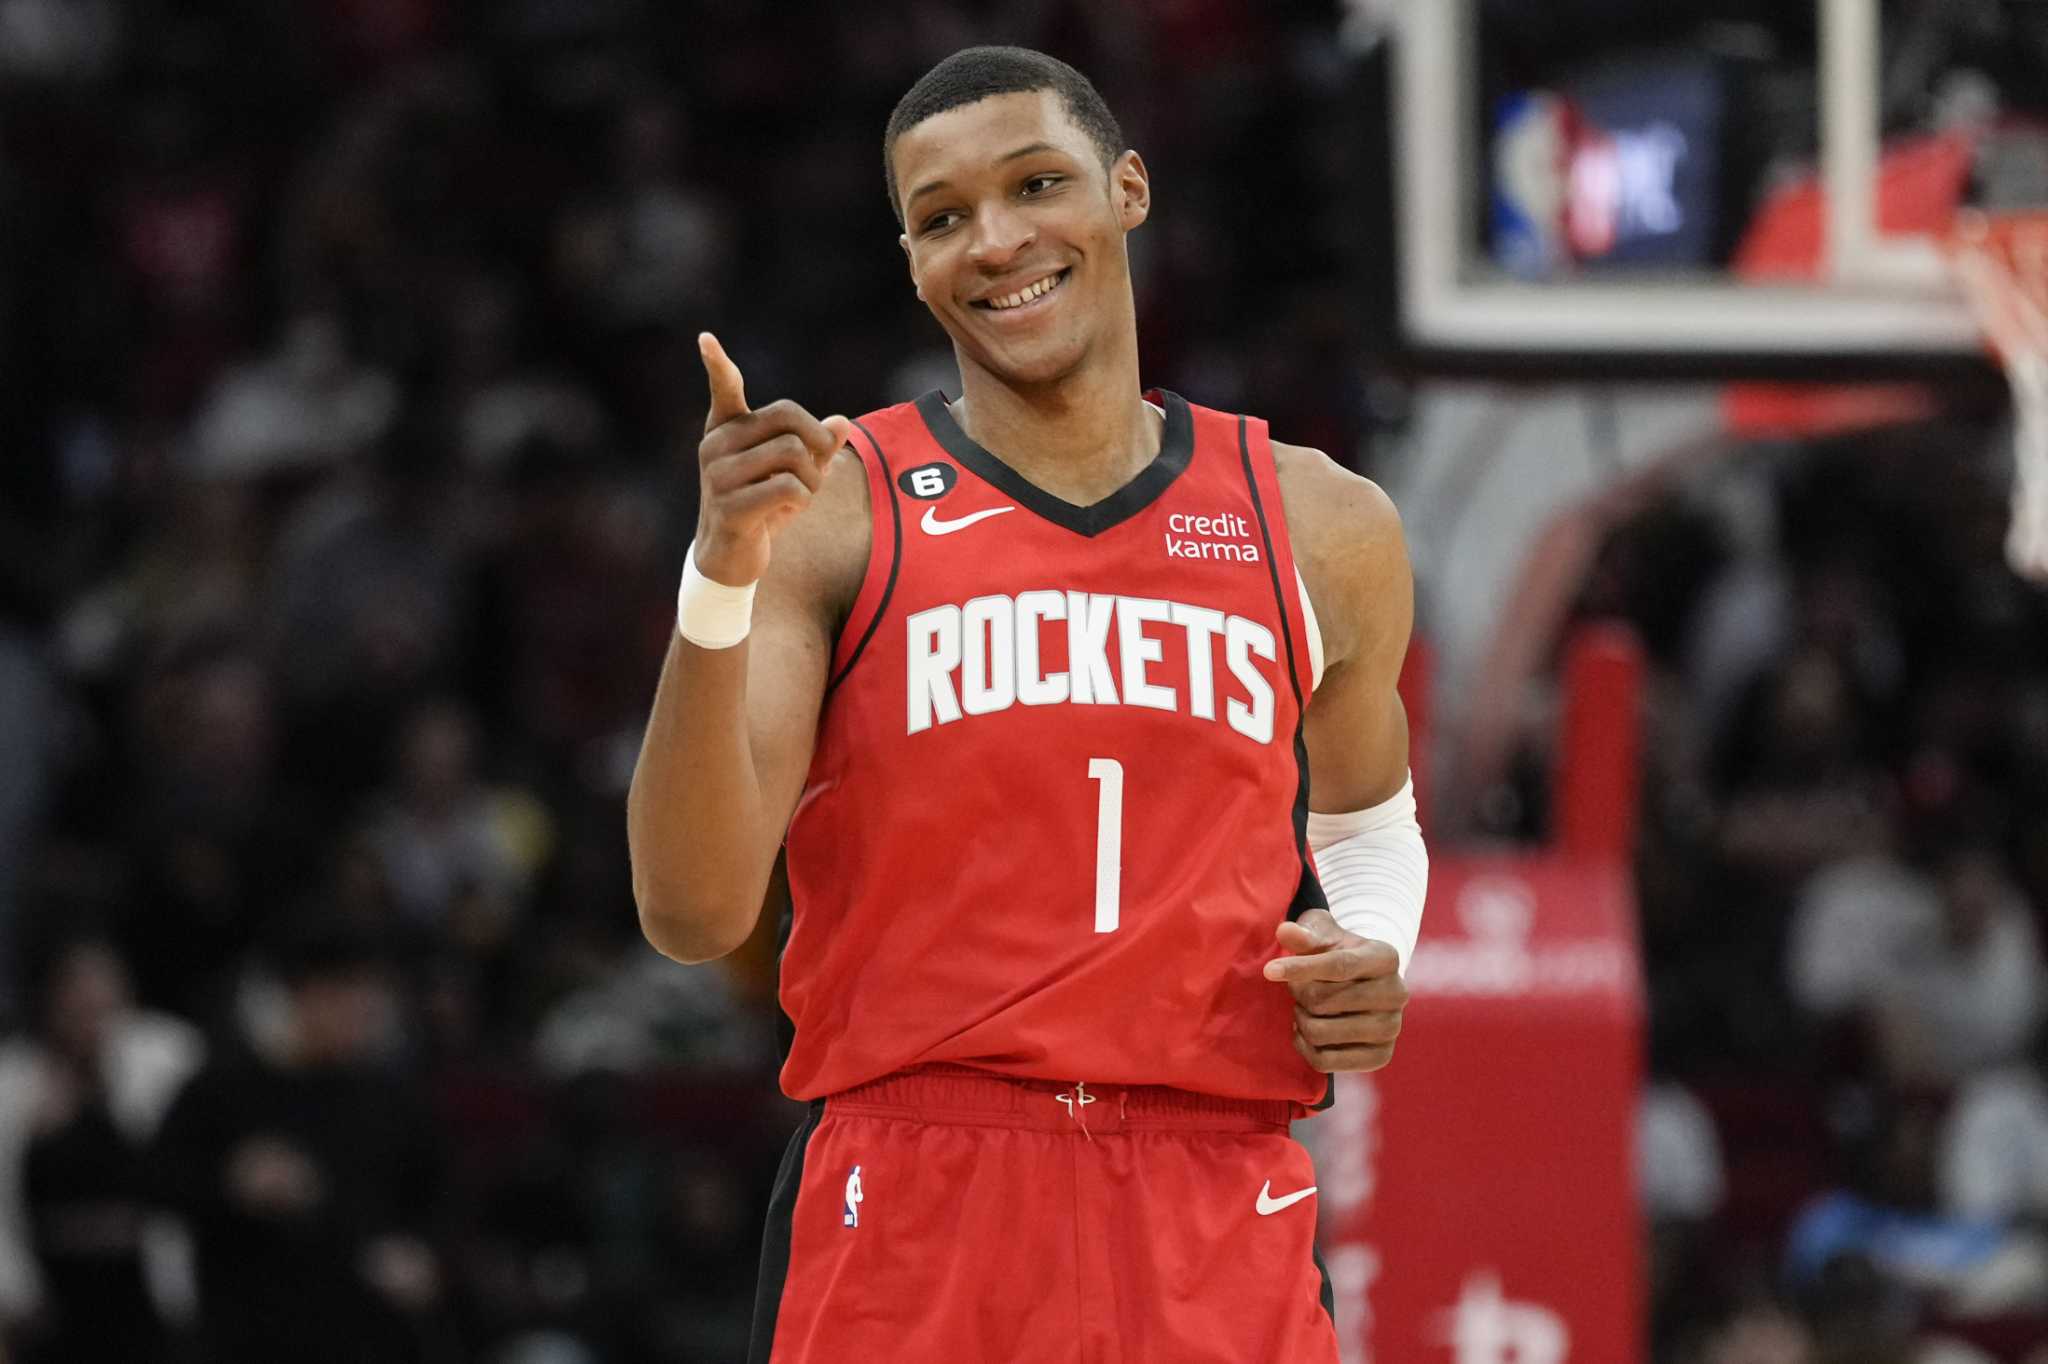 Rockets 111, Suns 97: A dominating win from start to finish